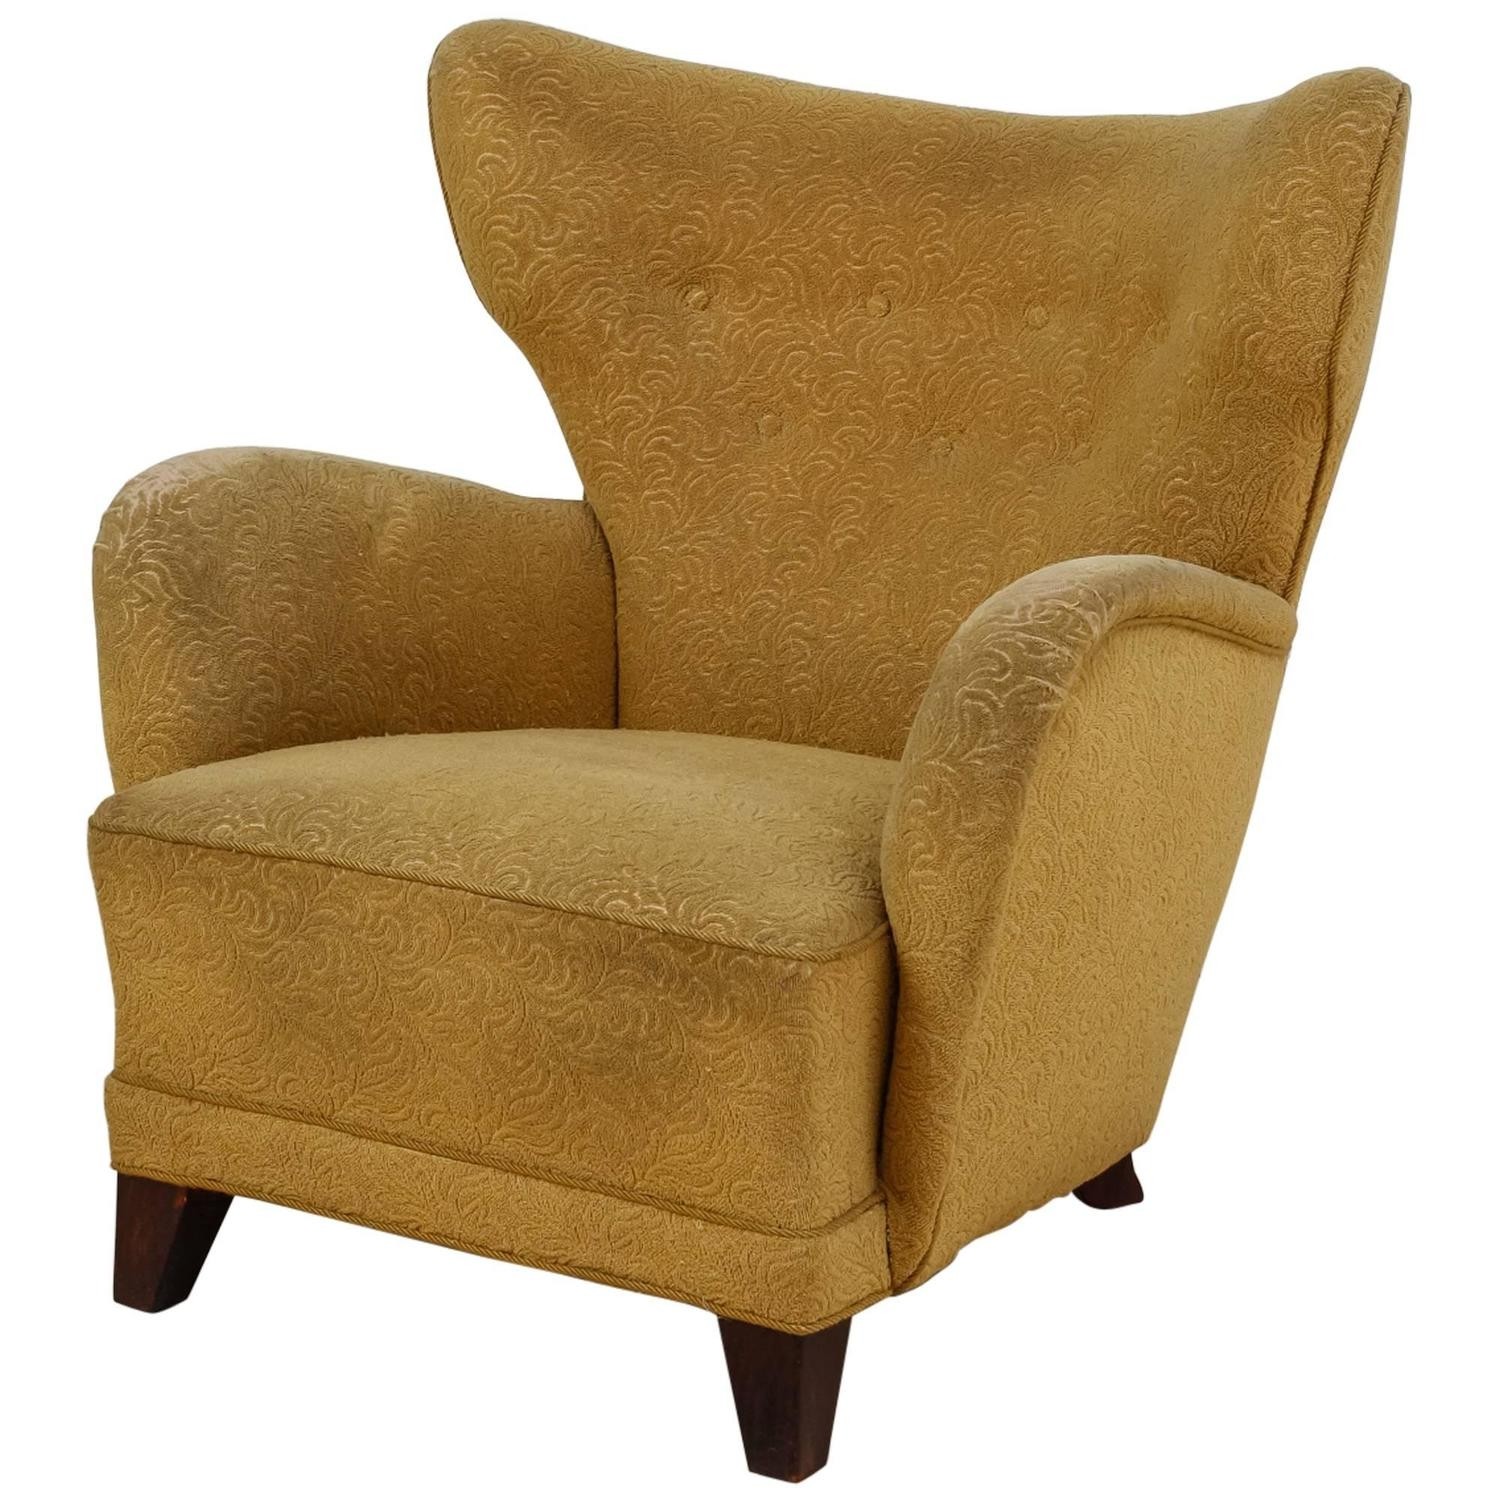 Danish wingback lounge chair with yellow upholstery 1940s